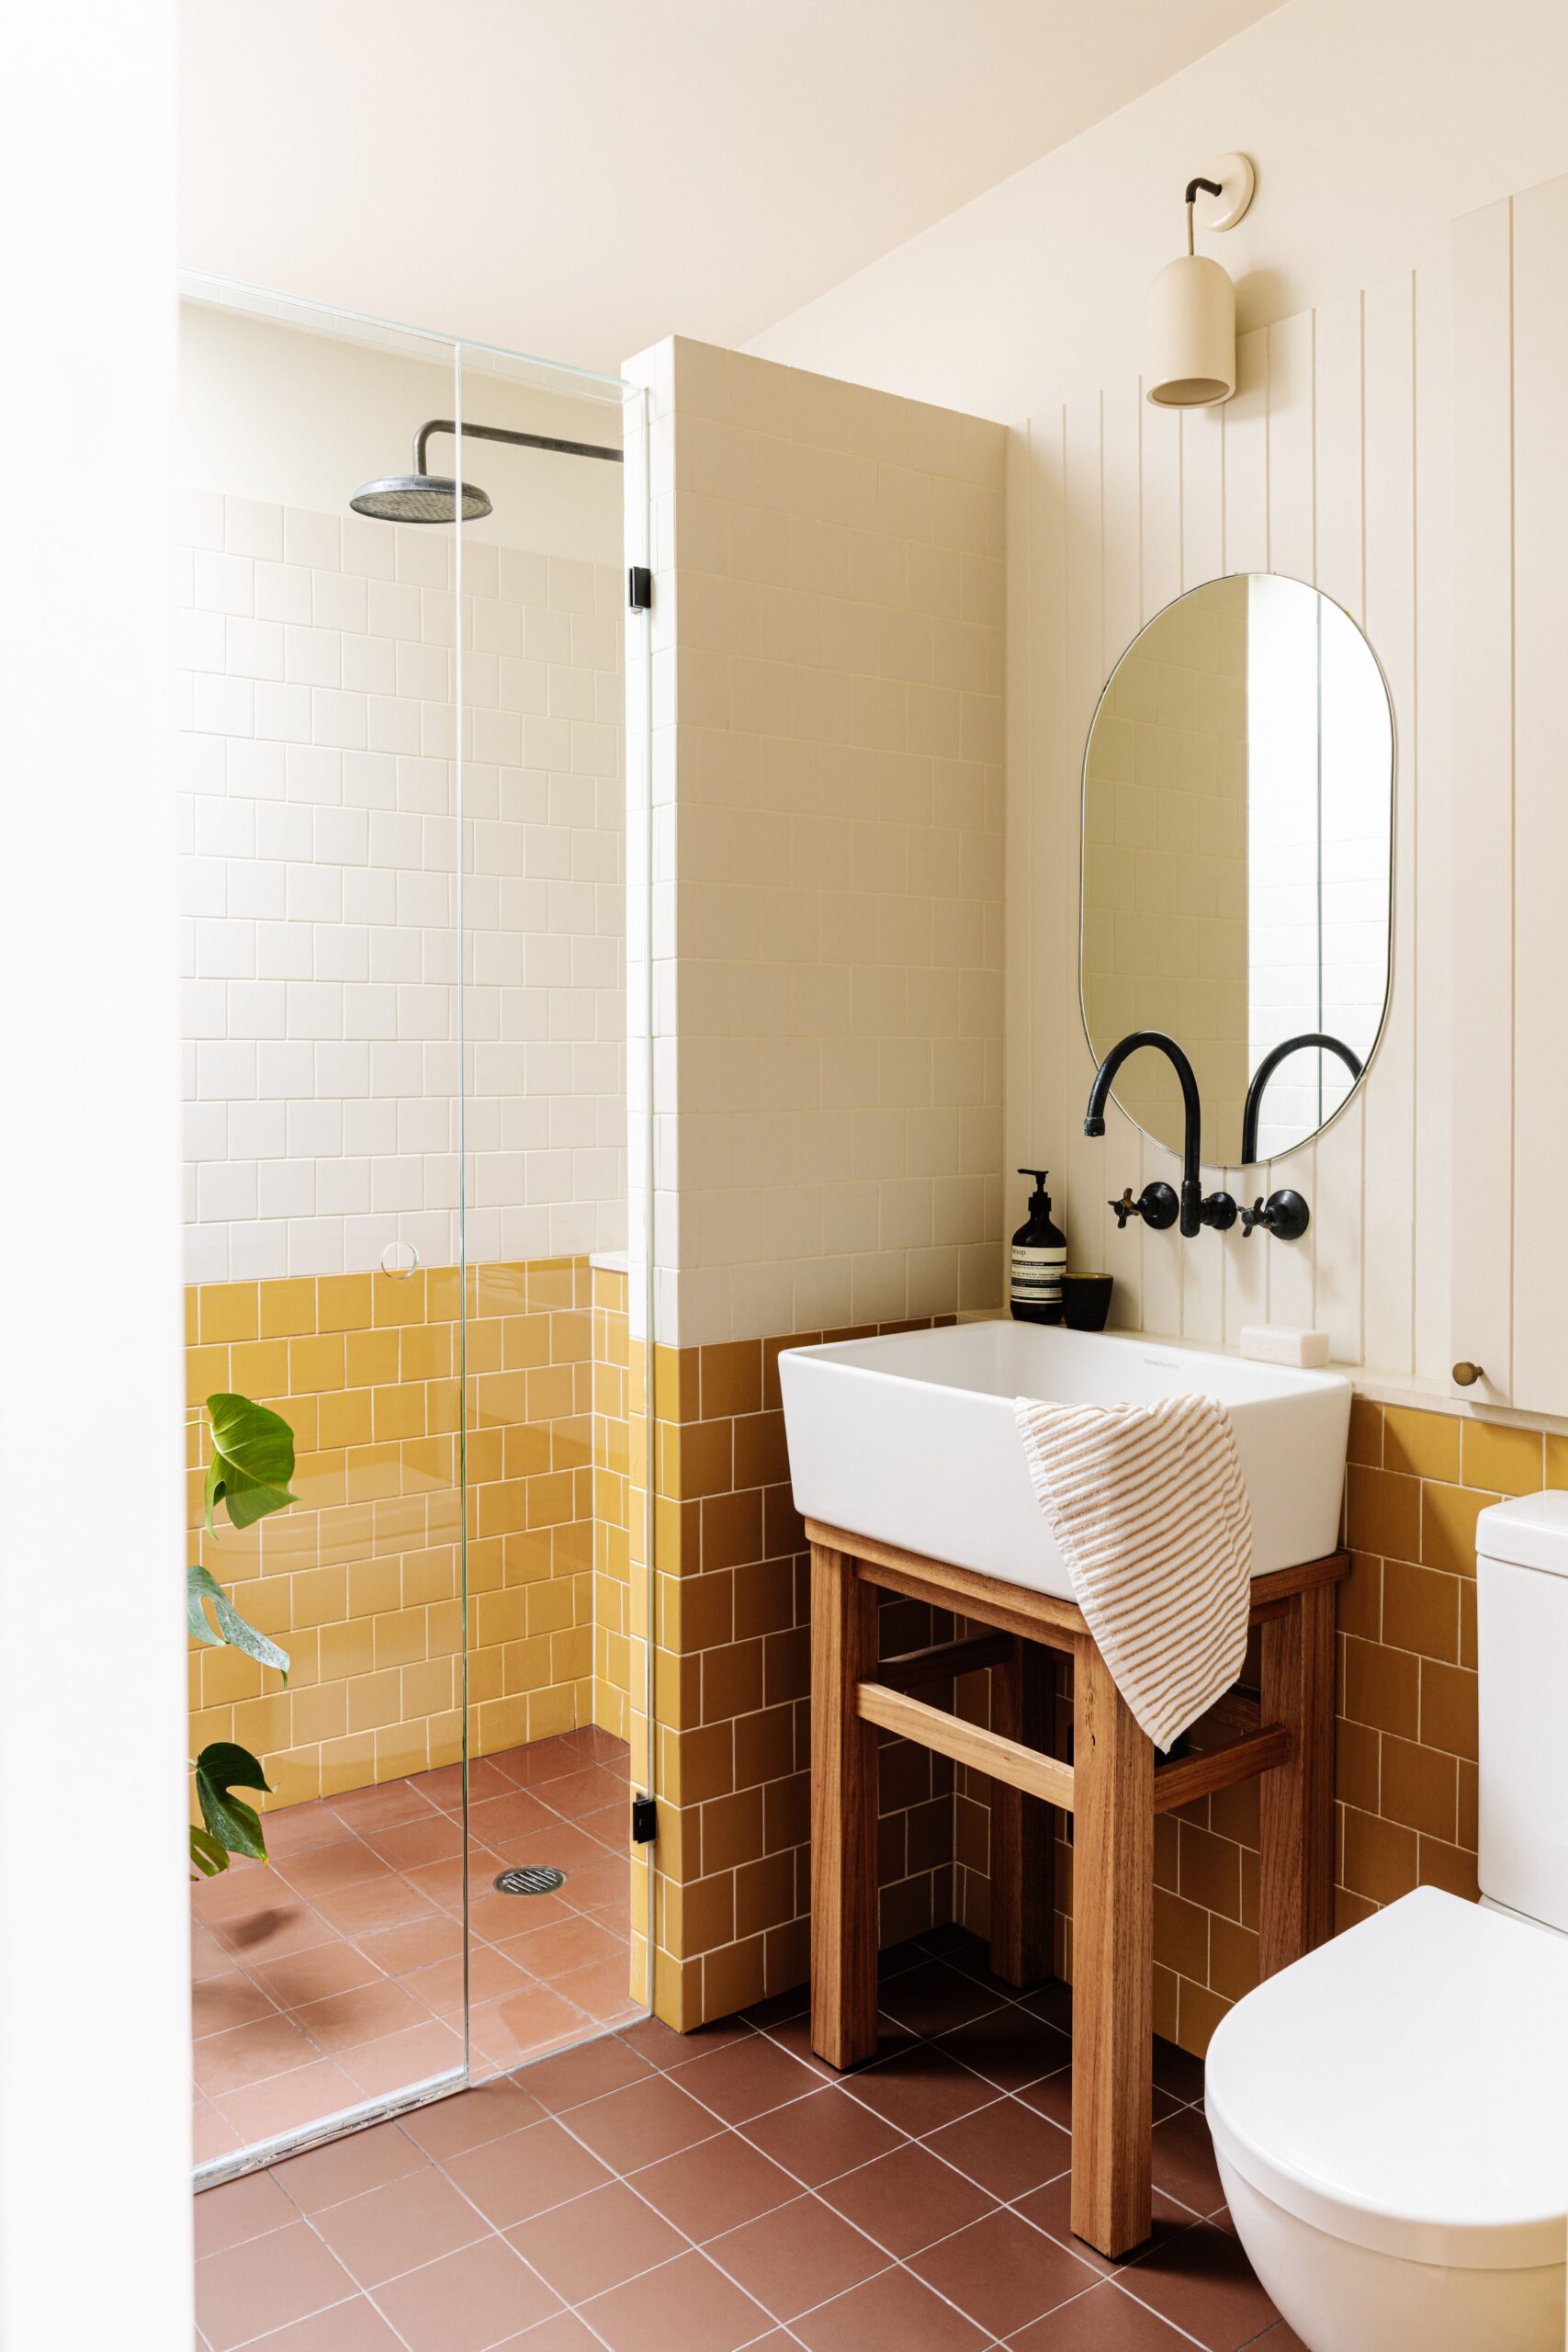 Creative Ways to Spruce Up Your Bathroom